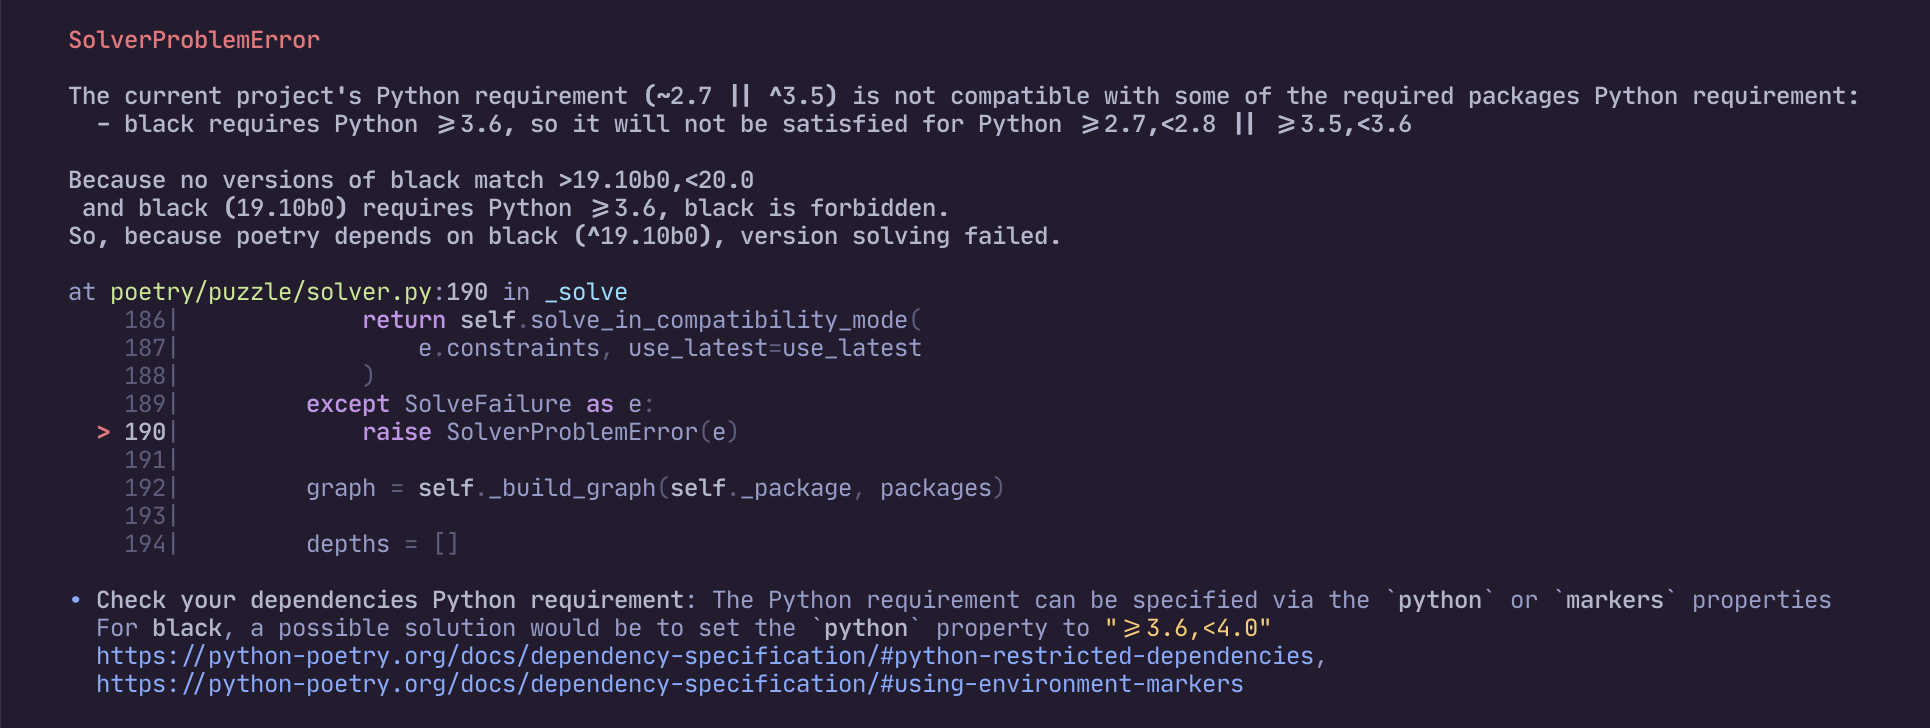 Fixing Black.exe errors in Python 3.7
Recommended software for resolving Black.exe issues